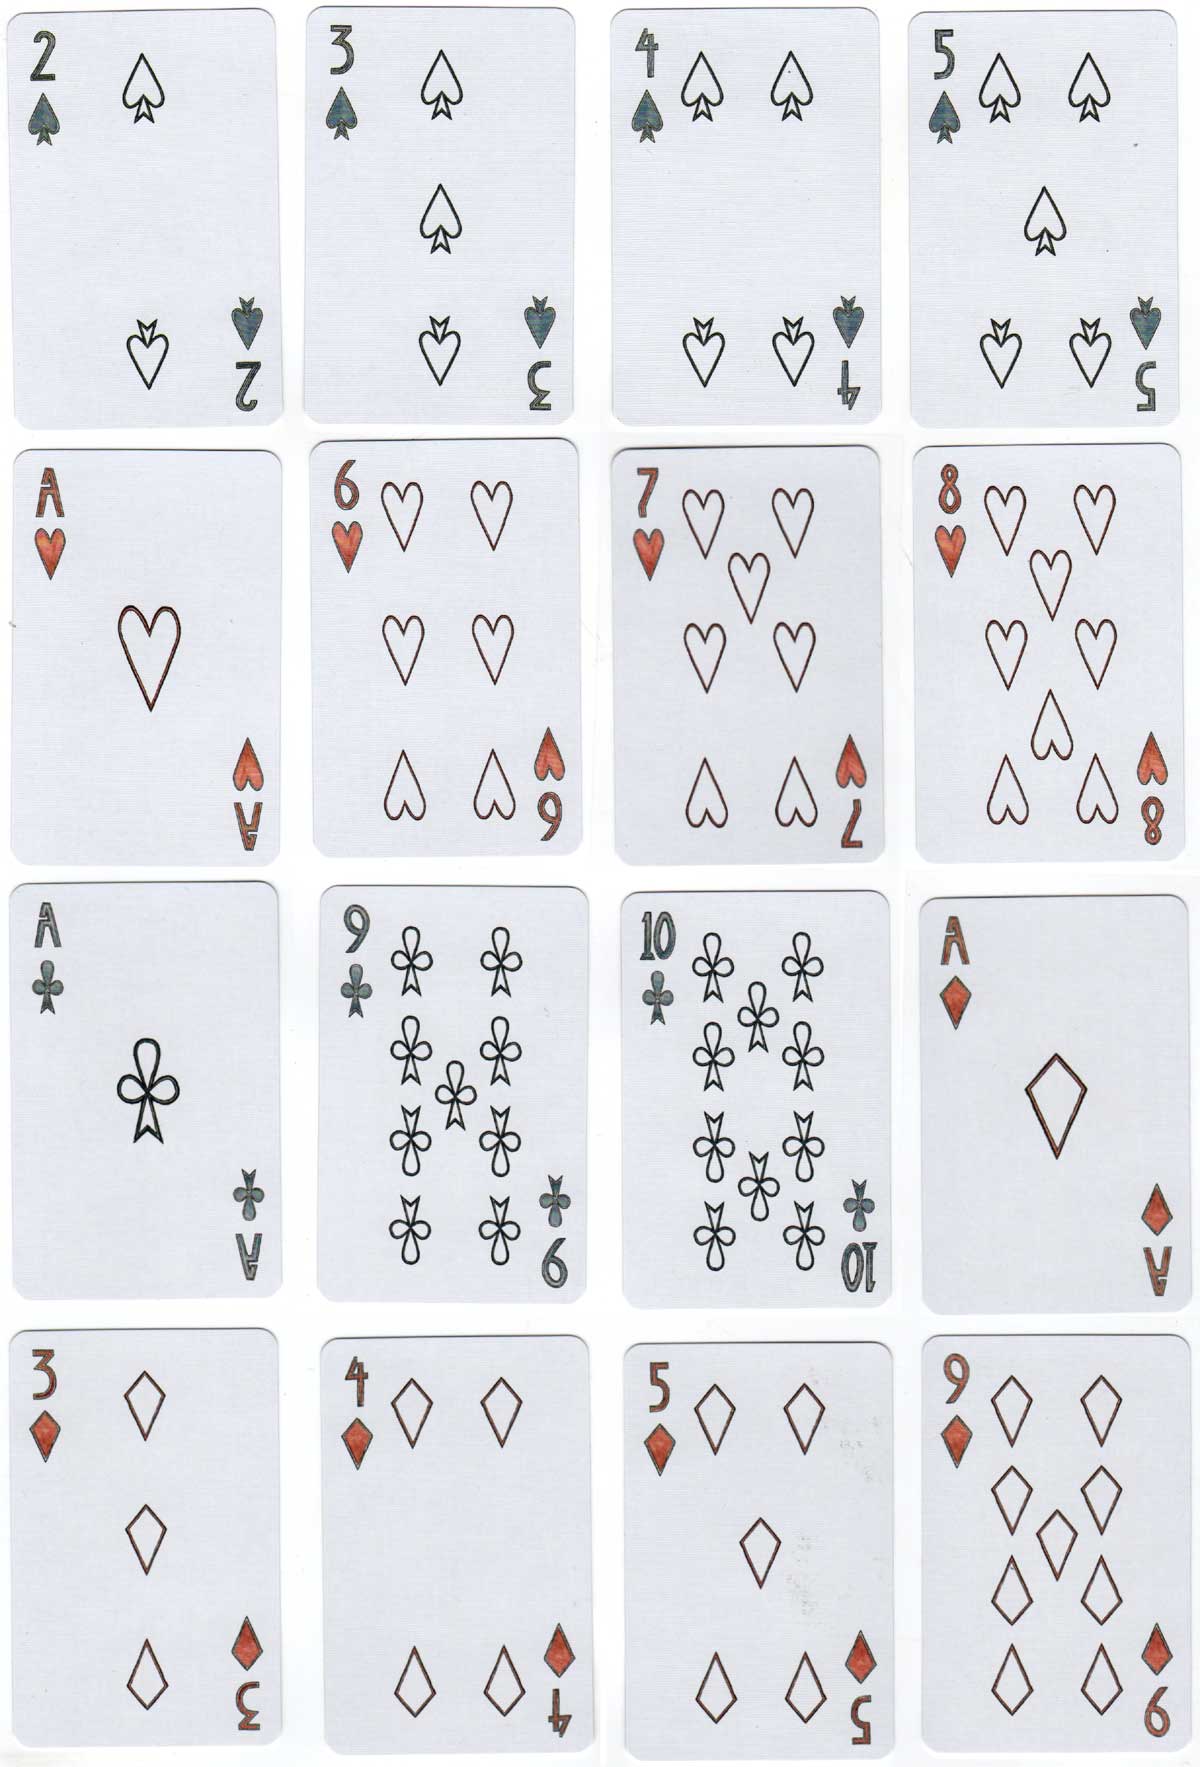 Erlenmeyer City Sights hand-illustrated playing cards by Stephanie Gray, 2015